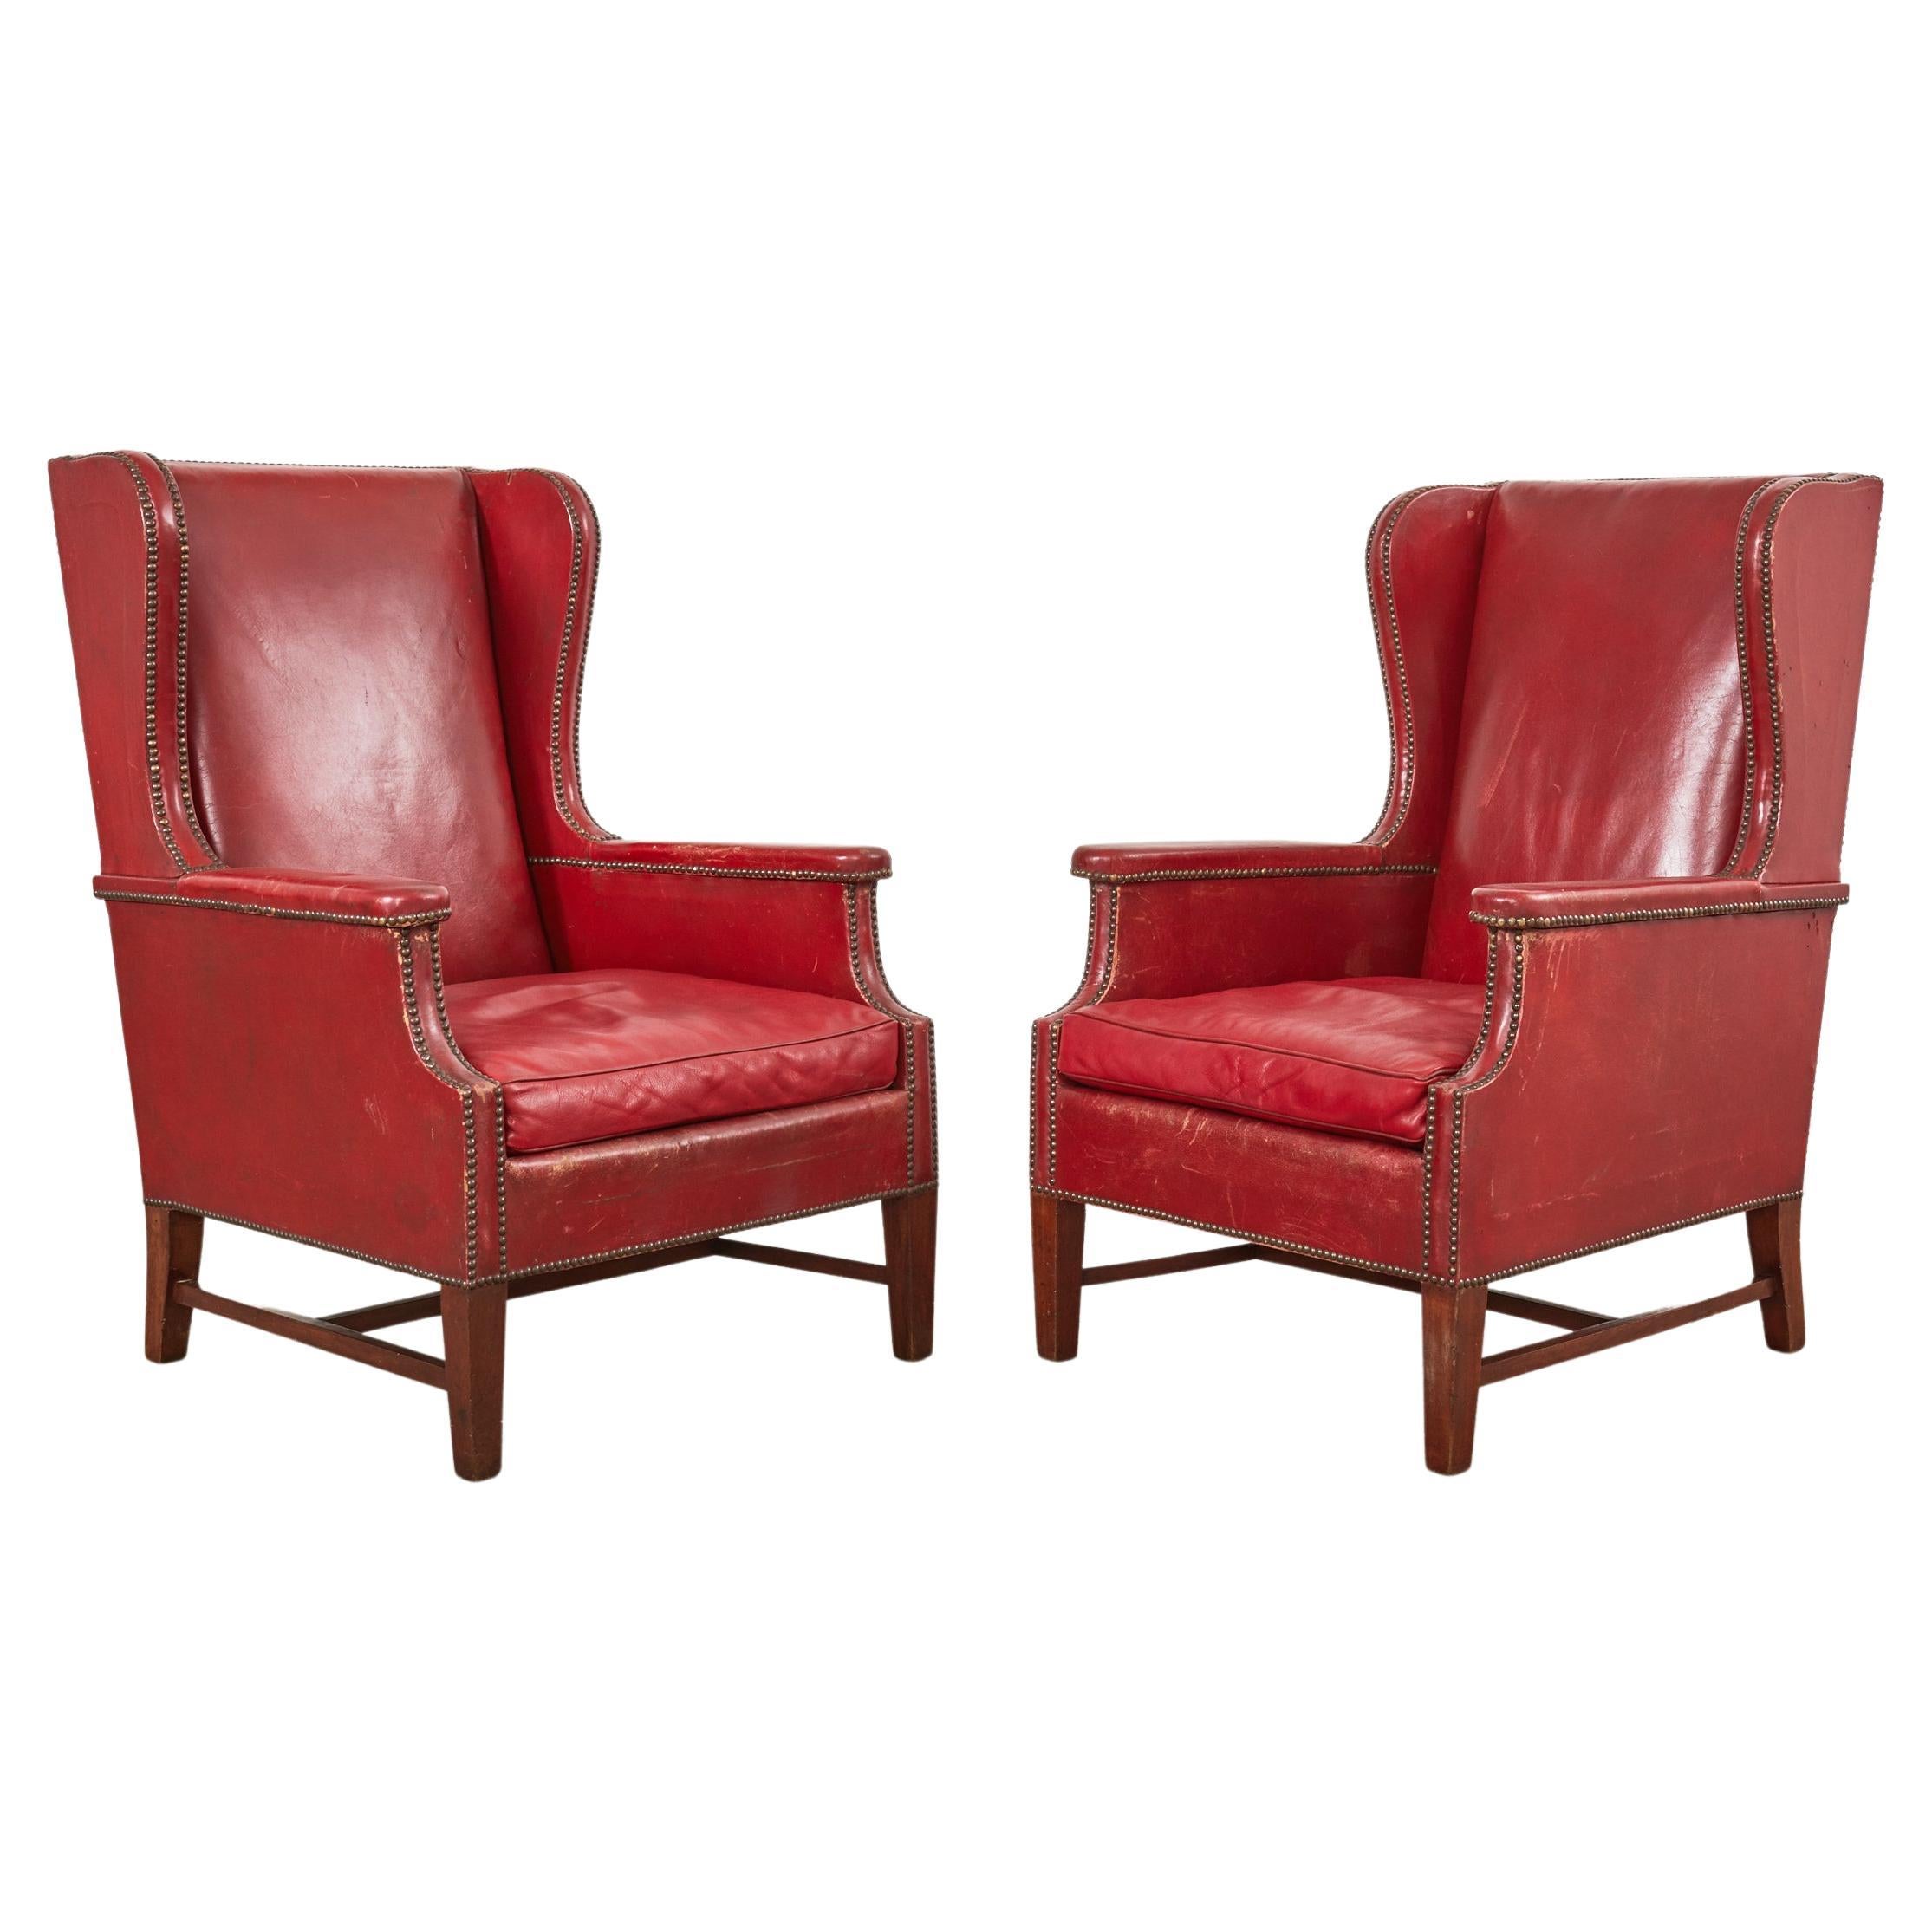 Pair of French Art Deco Cherry Red Leather Wingback Chairs